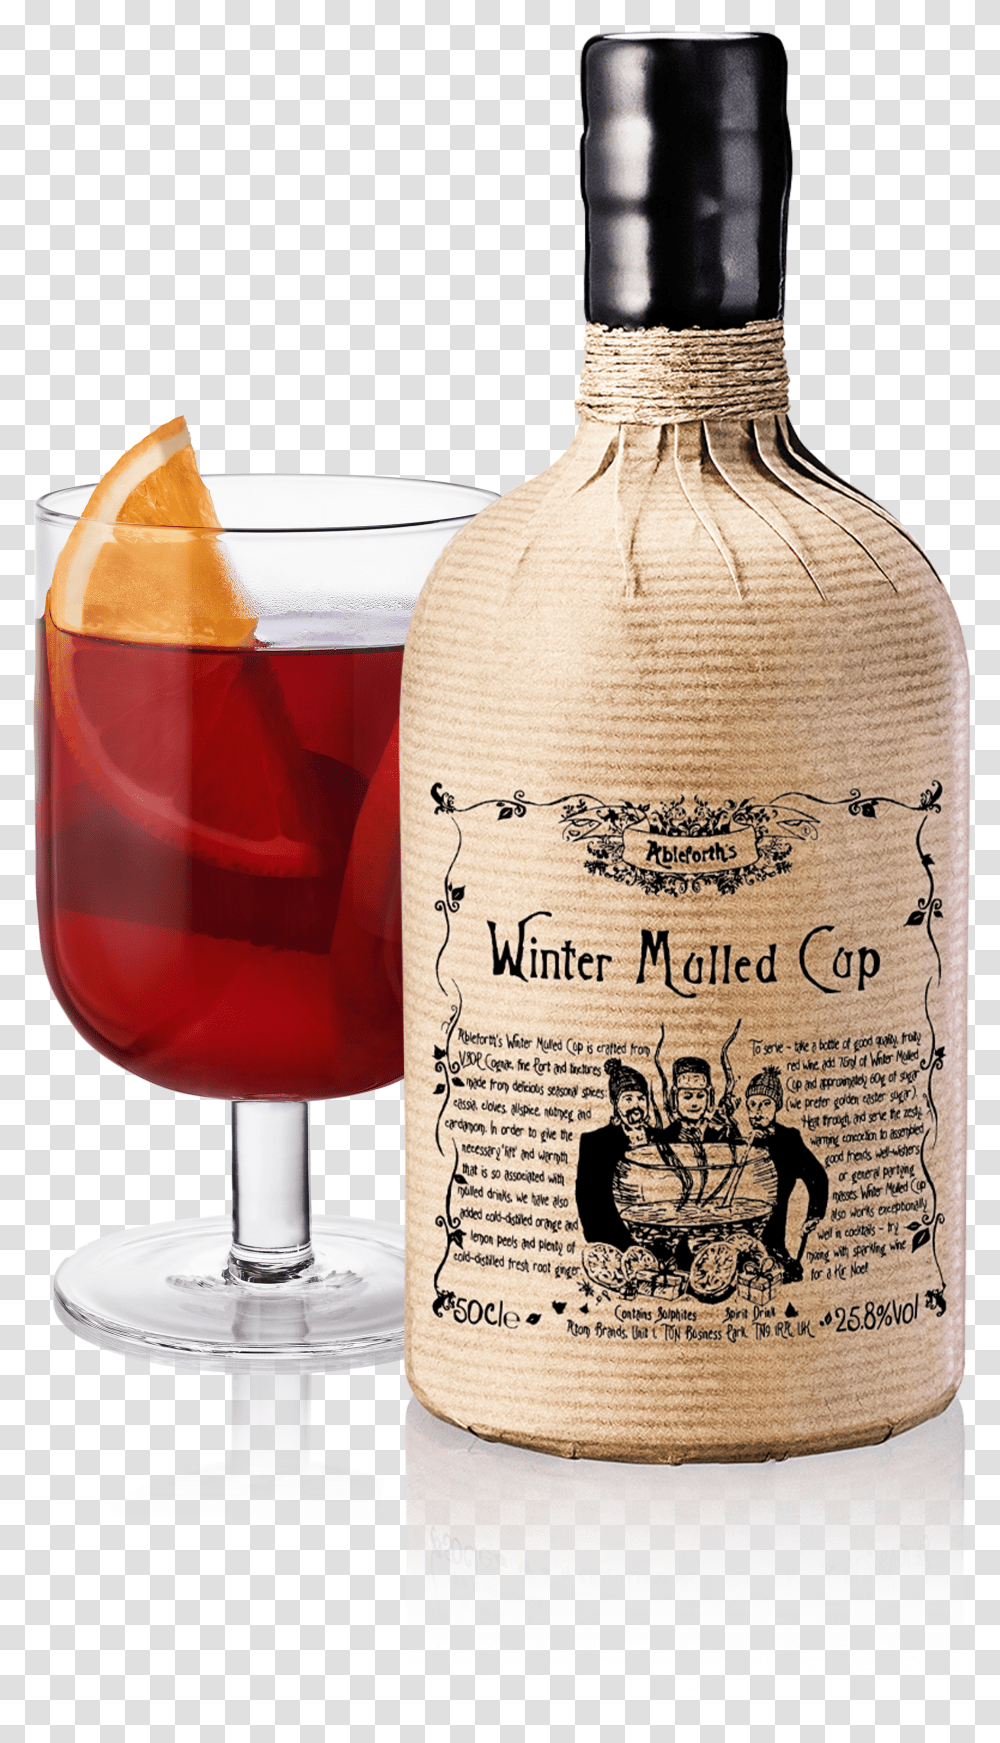 Winter Mulled Cup Amp Mulled Wine Glass Bottle Transparent Png